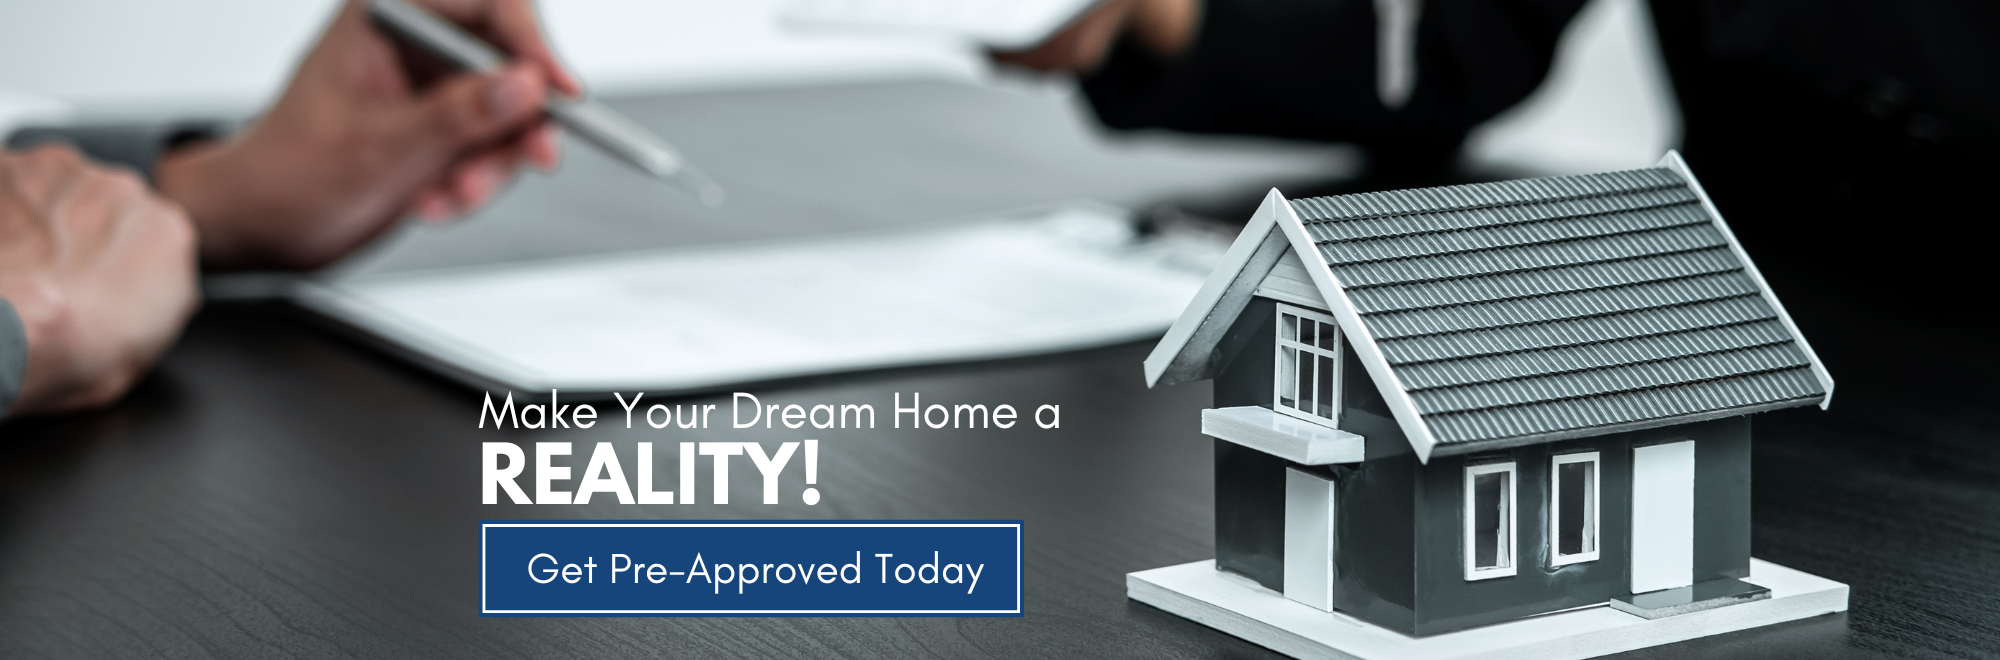 Make Your Dream Home a Reality!